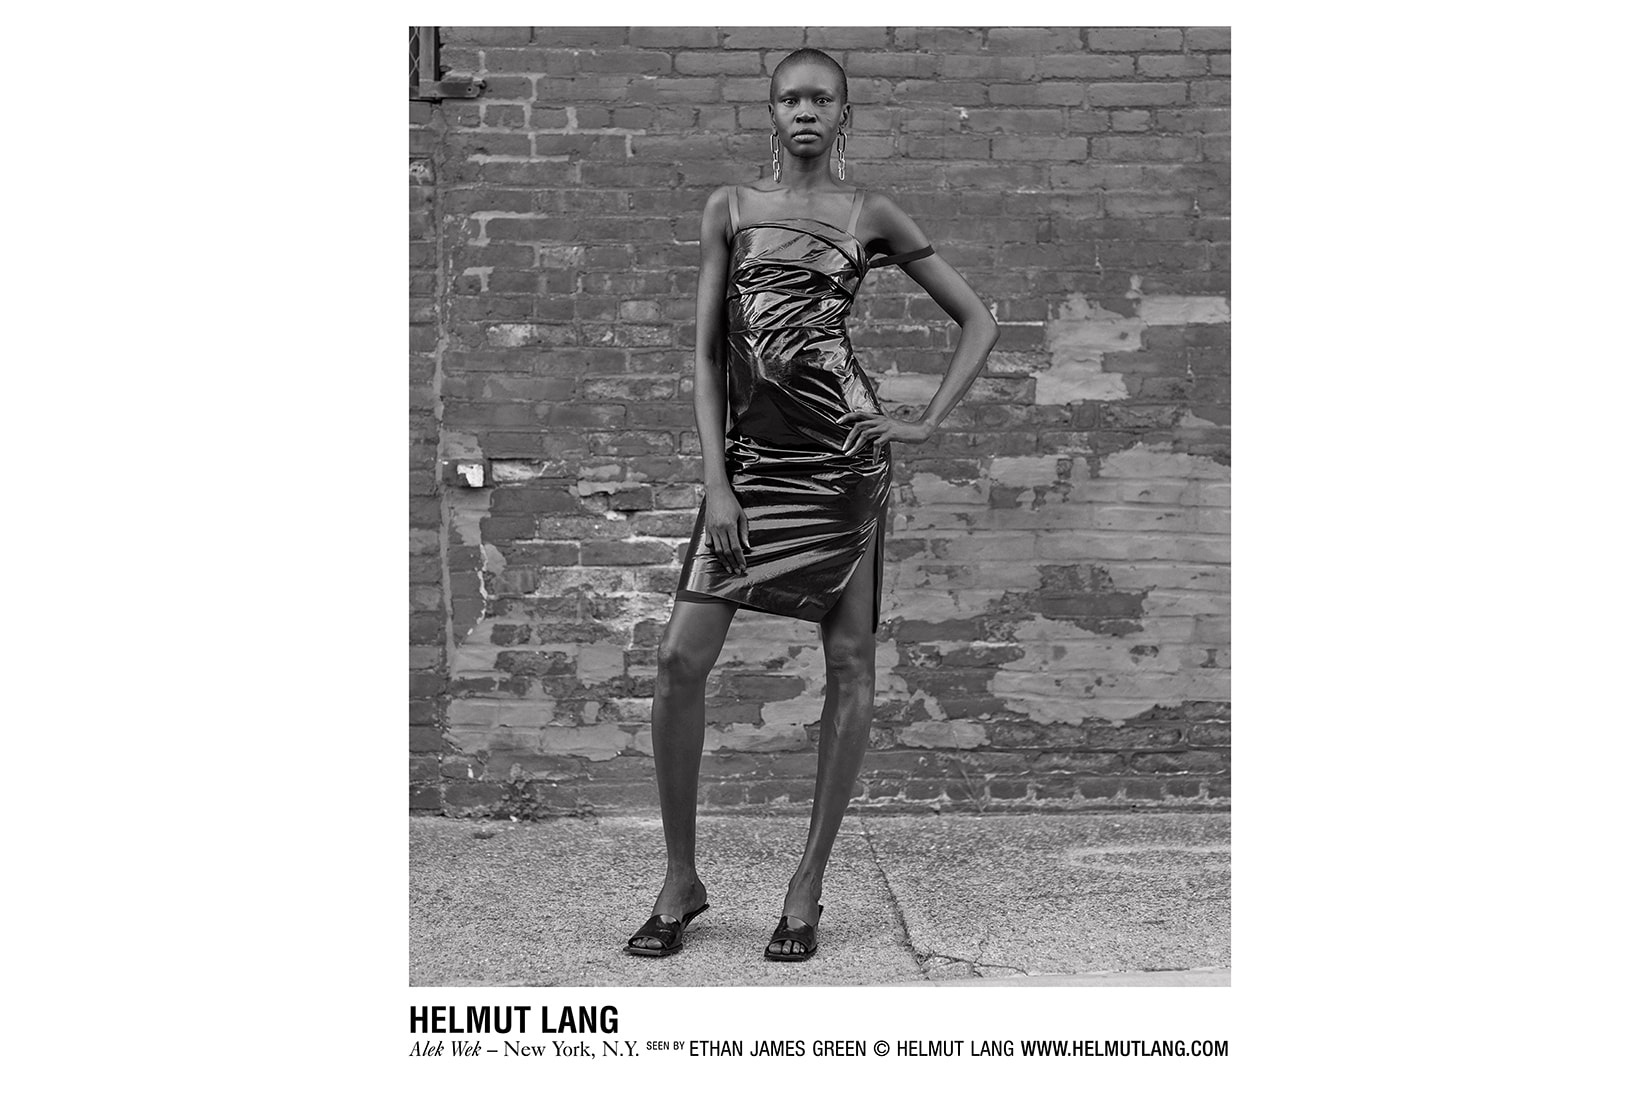 Helmut Lang 2017 Fall Winter Campaign Ethan James Green Shayne Oliver YOSHI Traci Lords